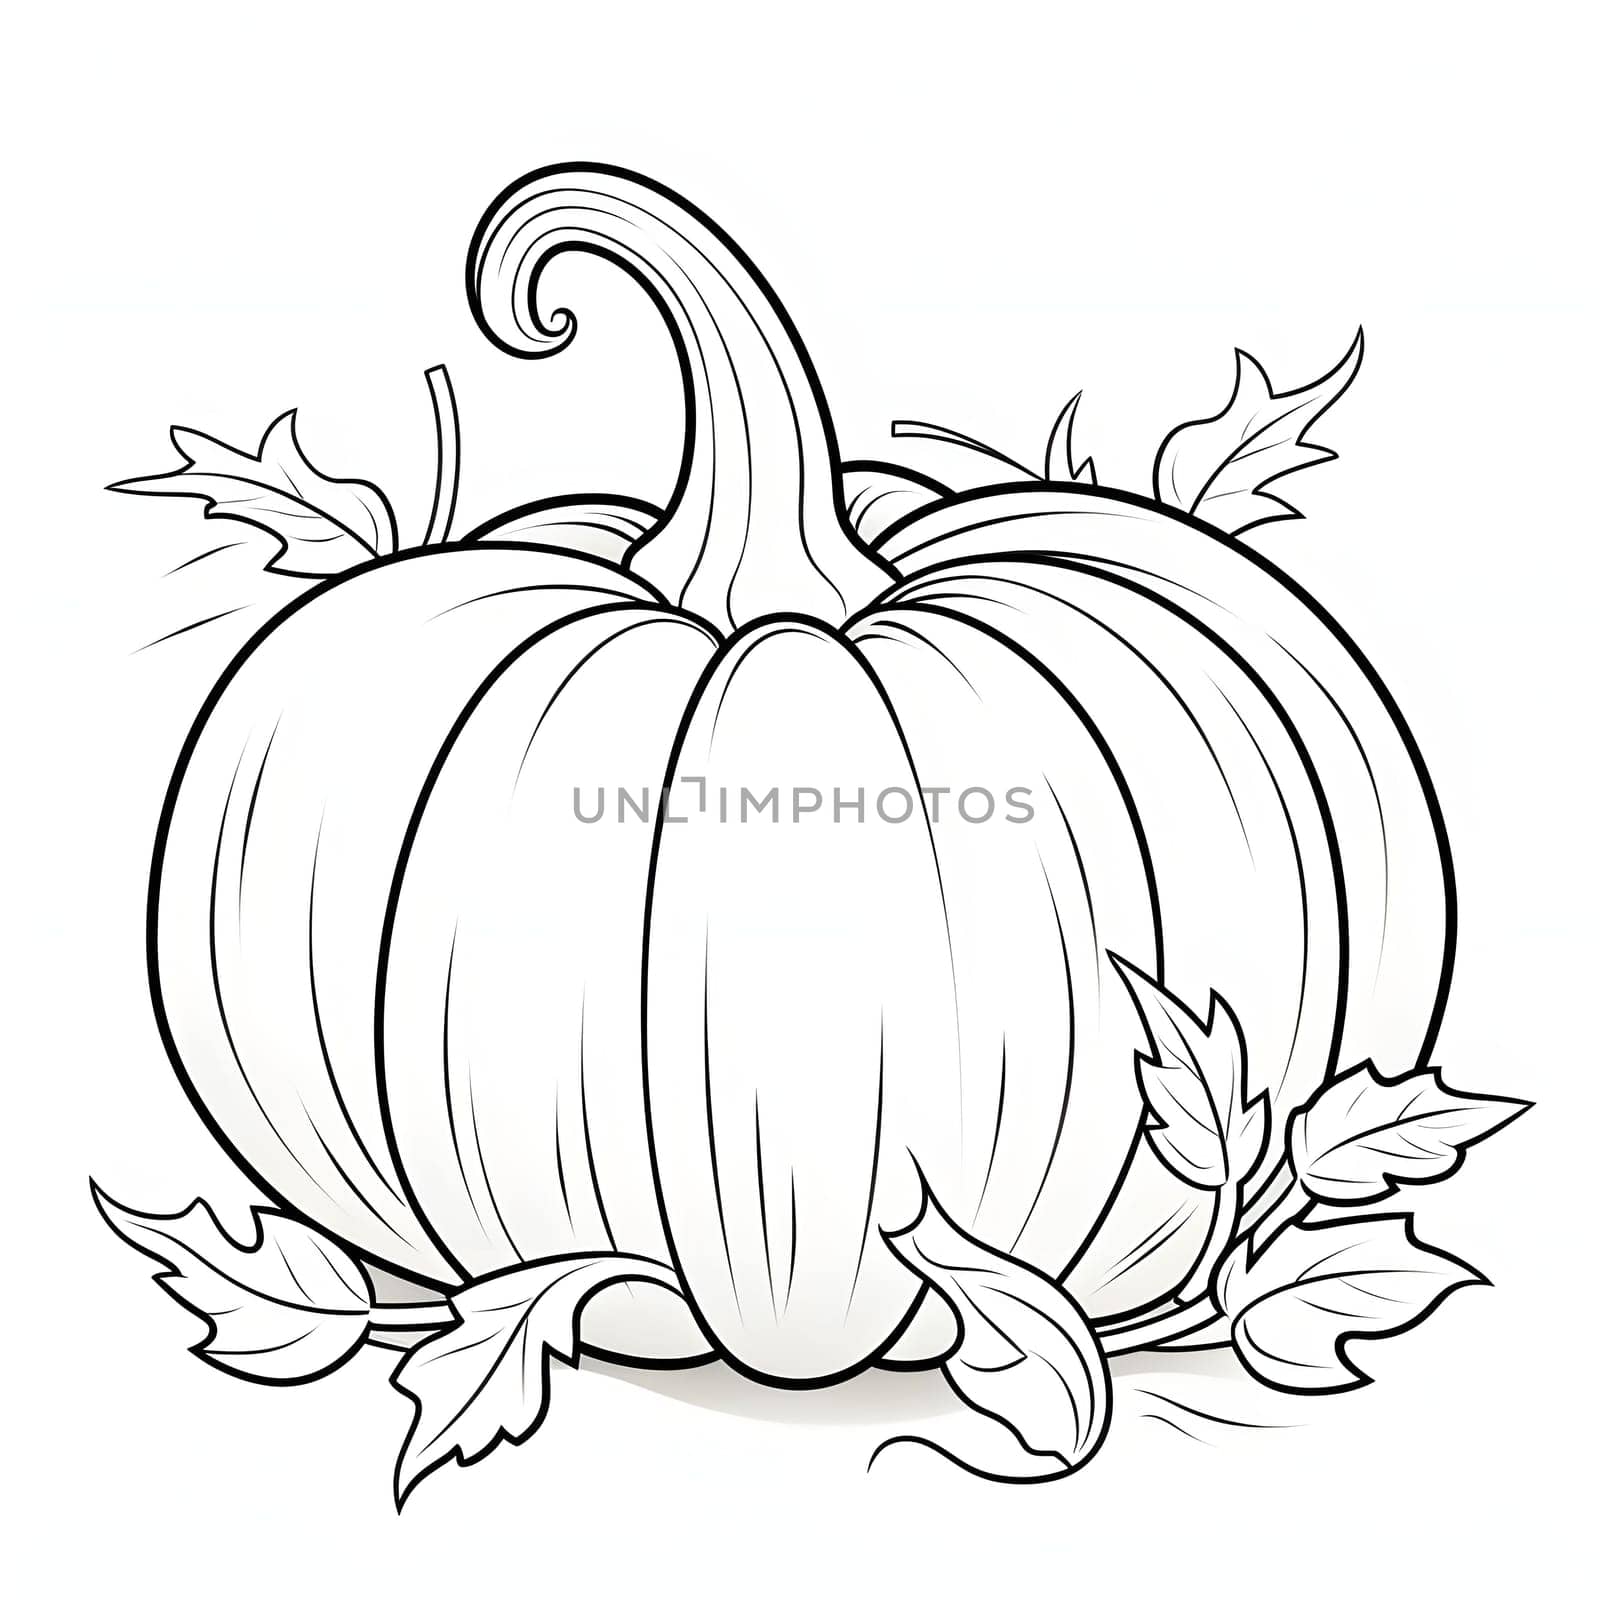 Pumpkin with tiny leaves. Pumpkin as a dish of thanksgiving for the harvest, picture on a white isolated background. Atmosphere of joy and celebration.